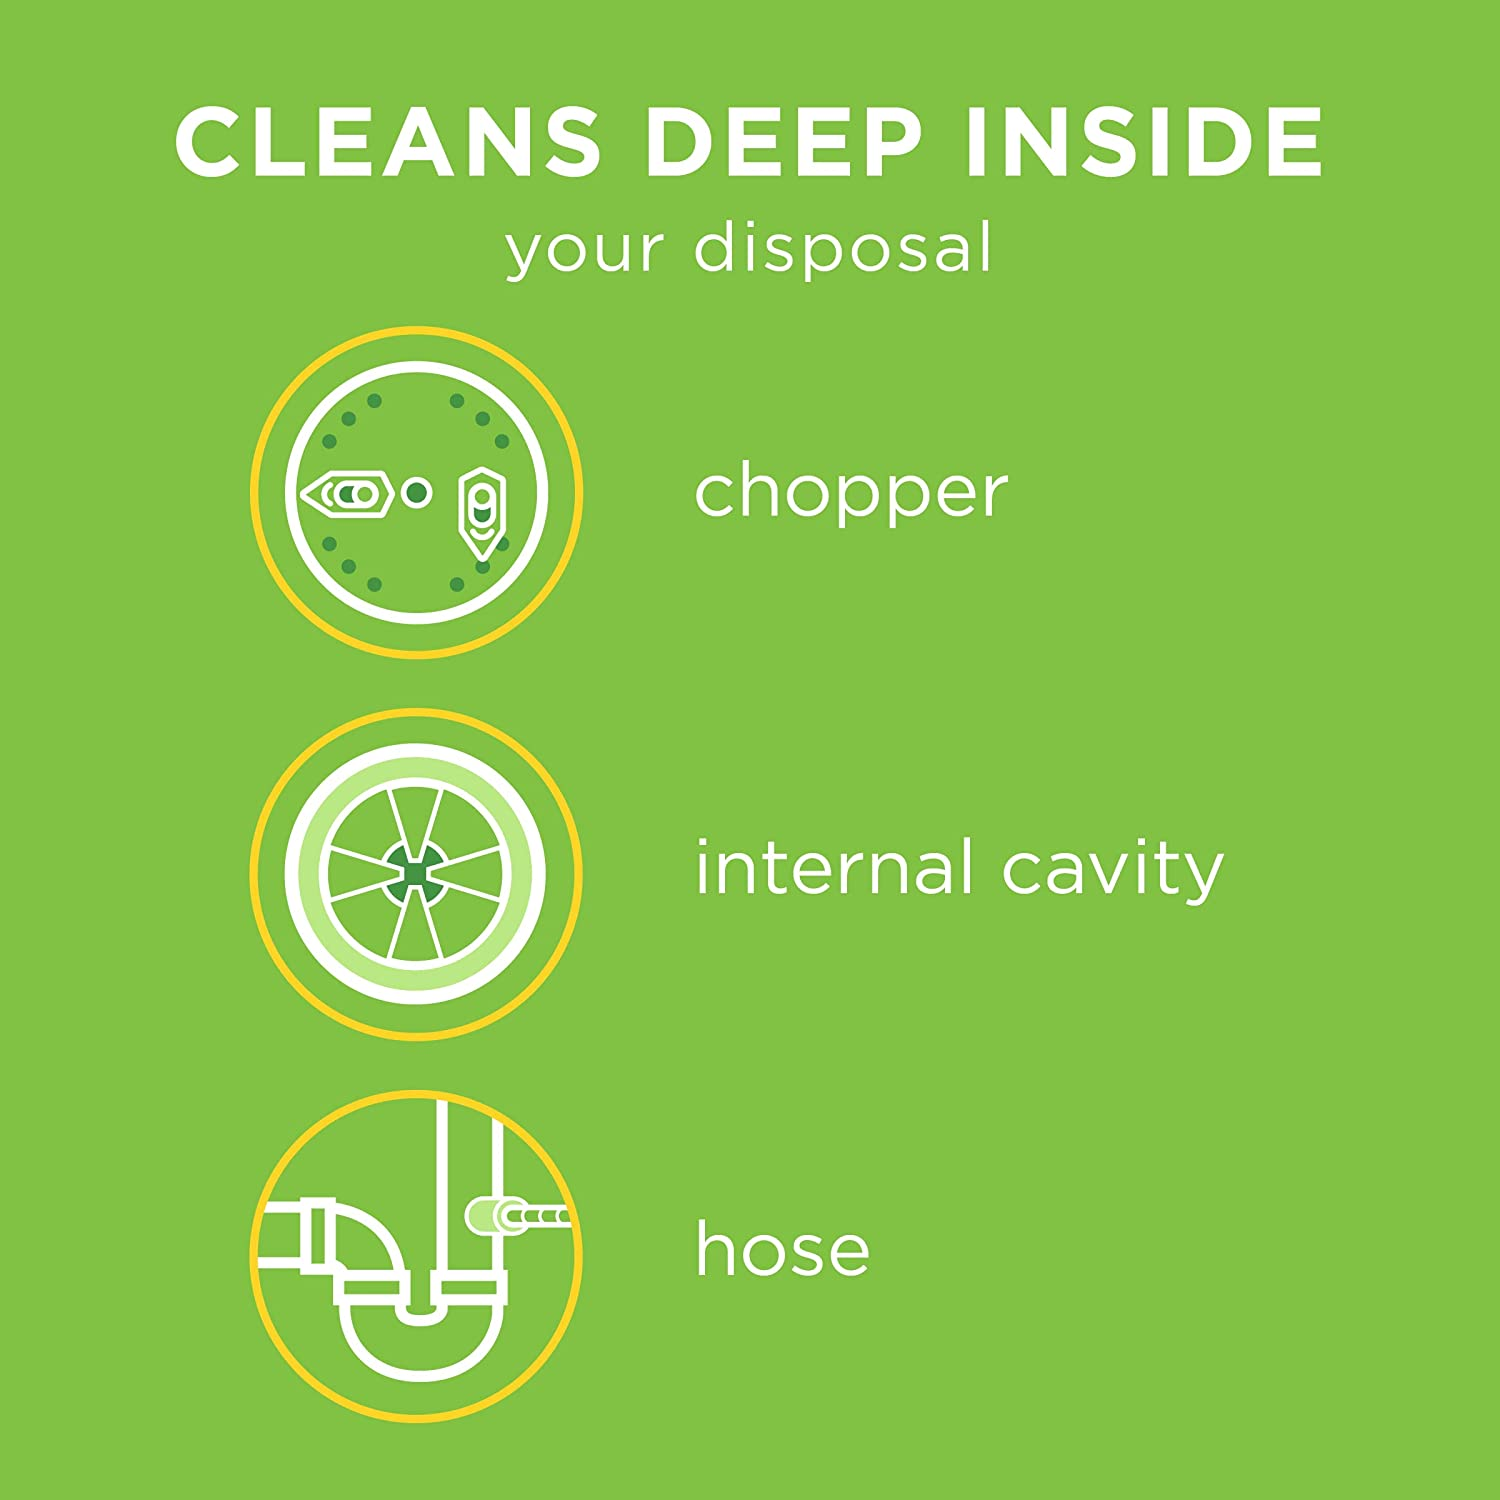 Garbage Disposal Cleaner, Removes Odor-Causing Residues, 3 Tablets